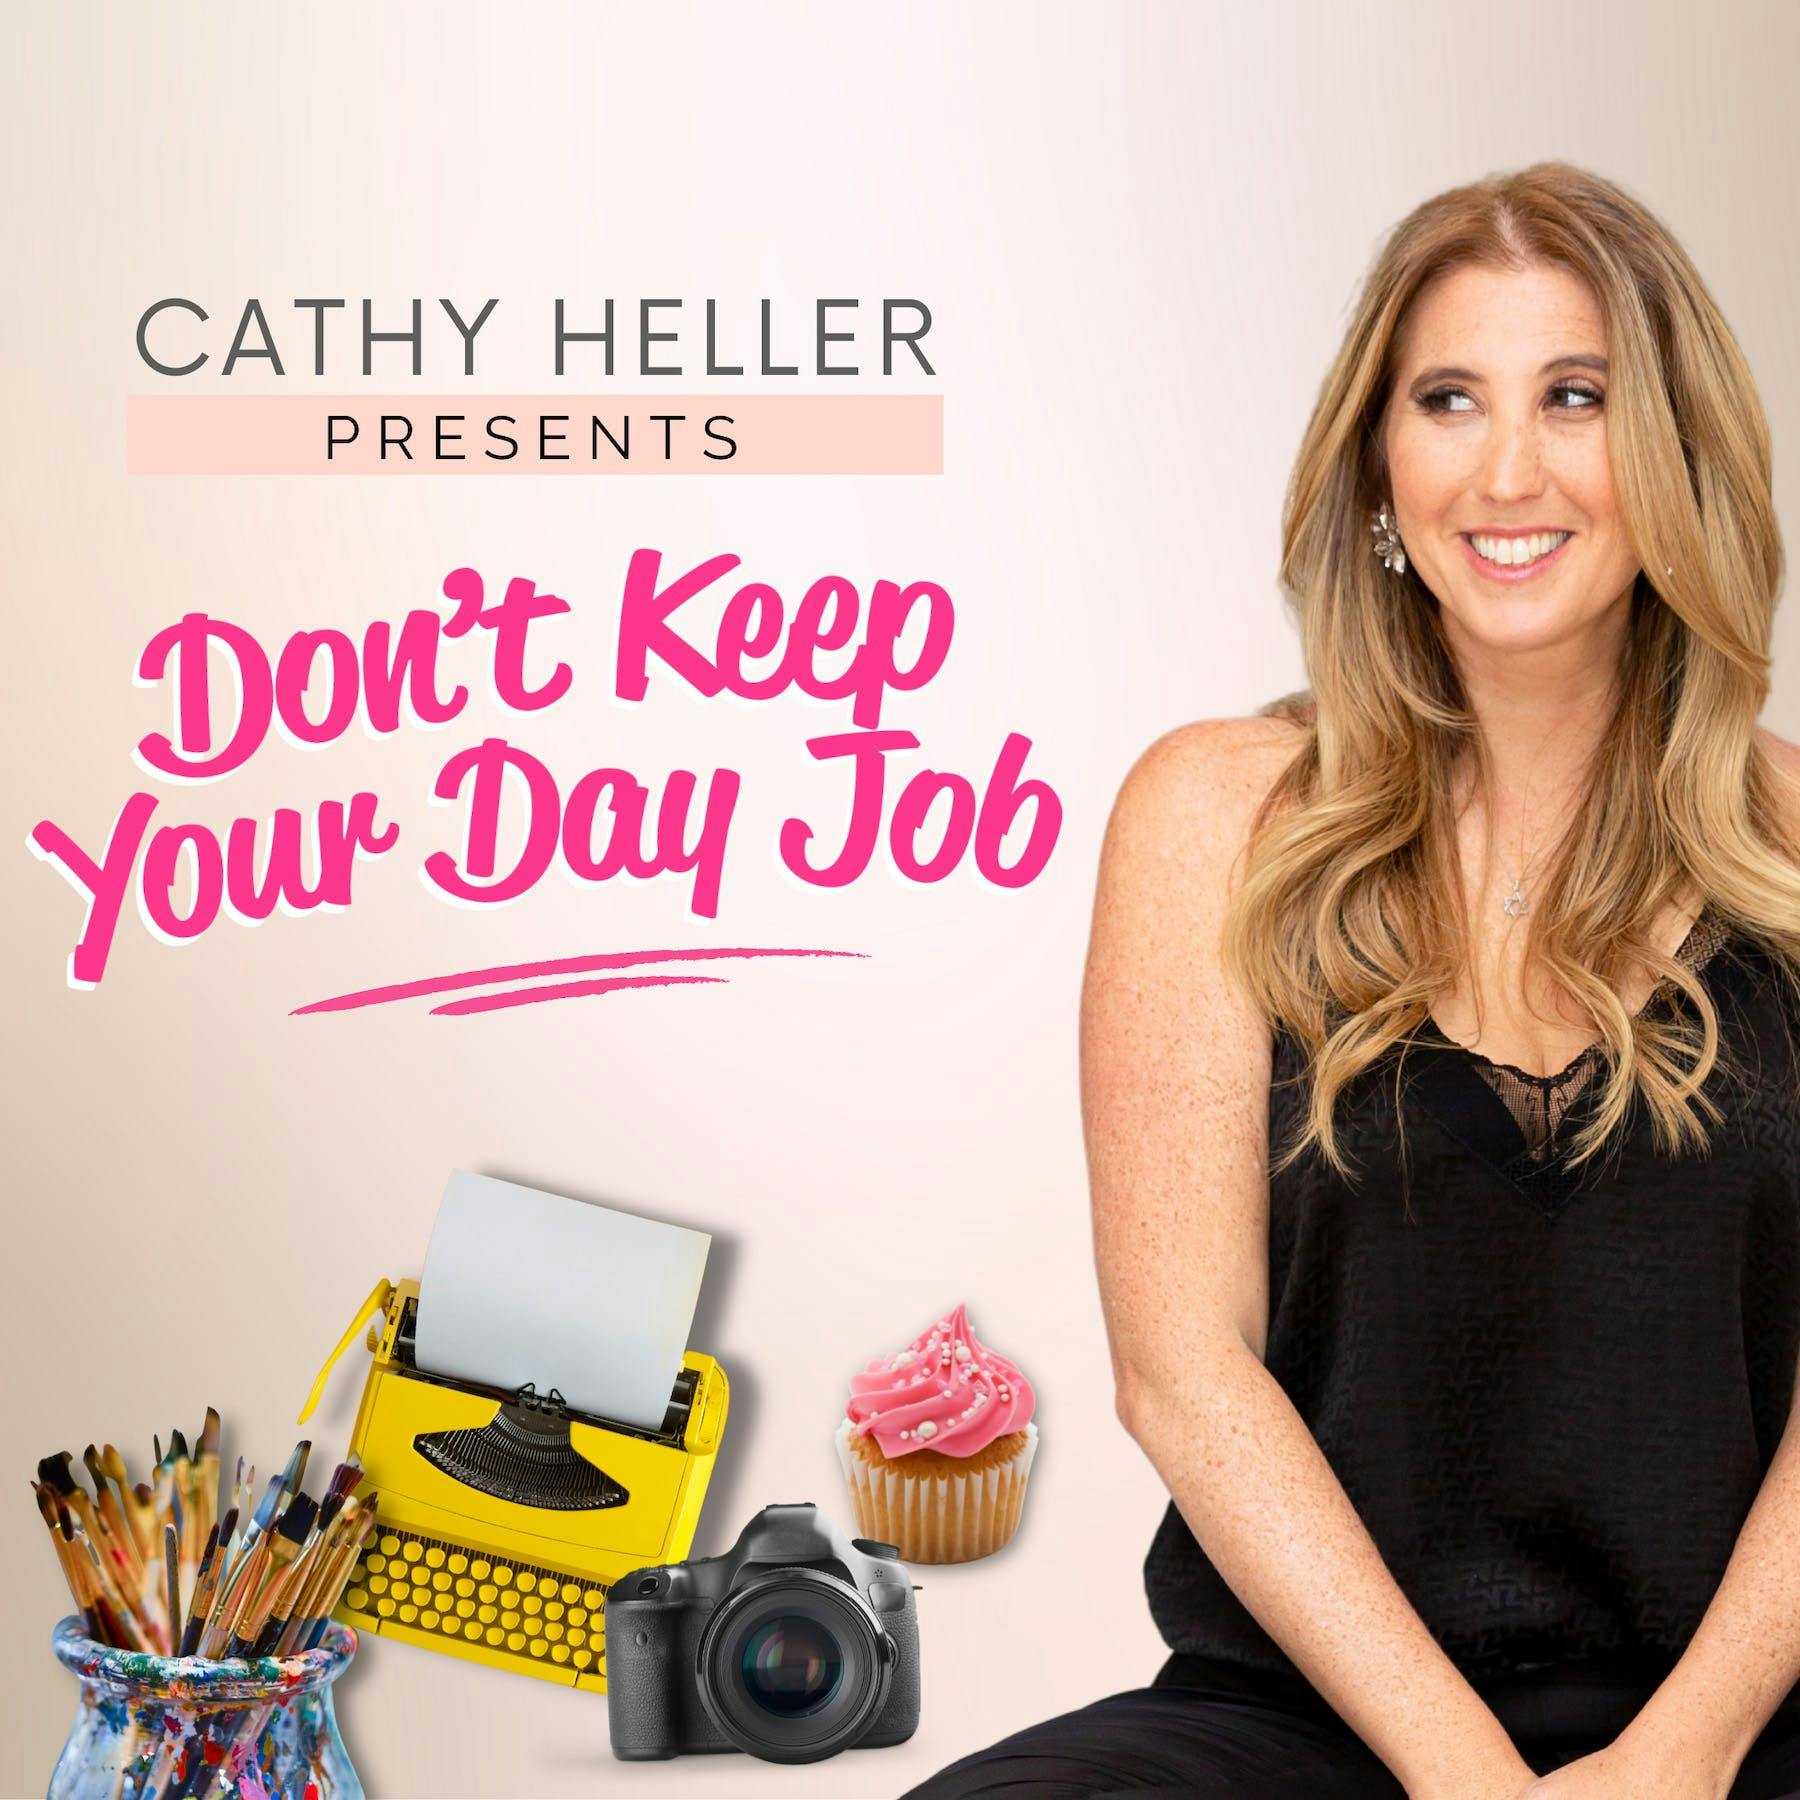 Cathy Heller Presents Don't Keep Your Day Job